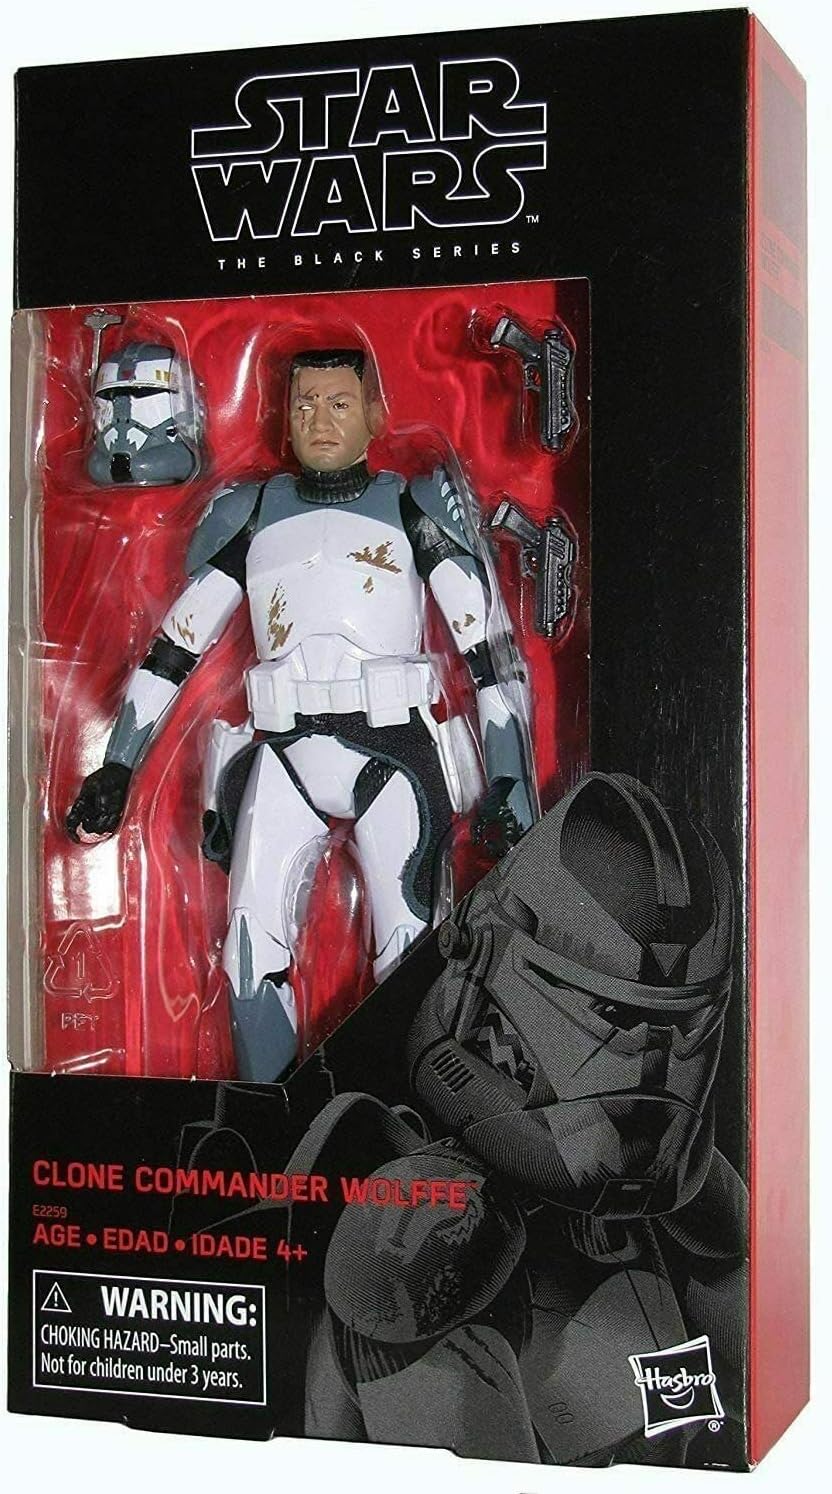 Clone Commander Wolffe - Star Wars: The Black Series 6" Action Figure